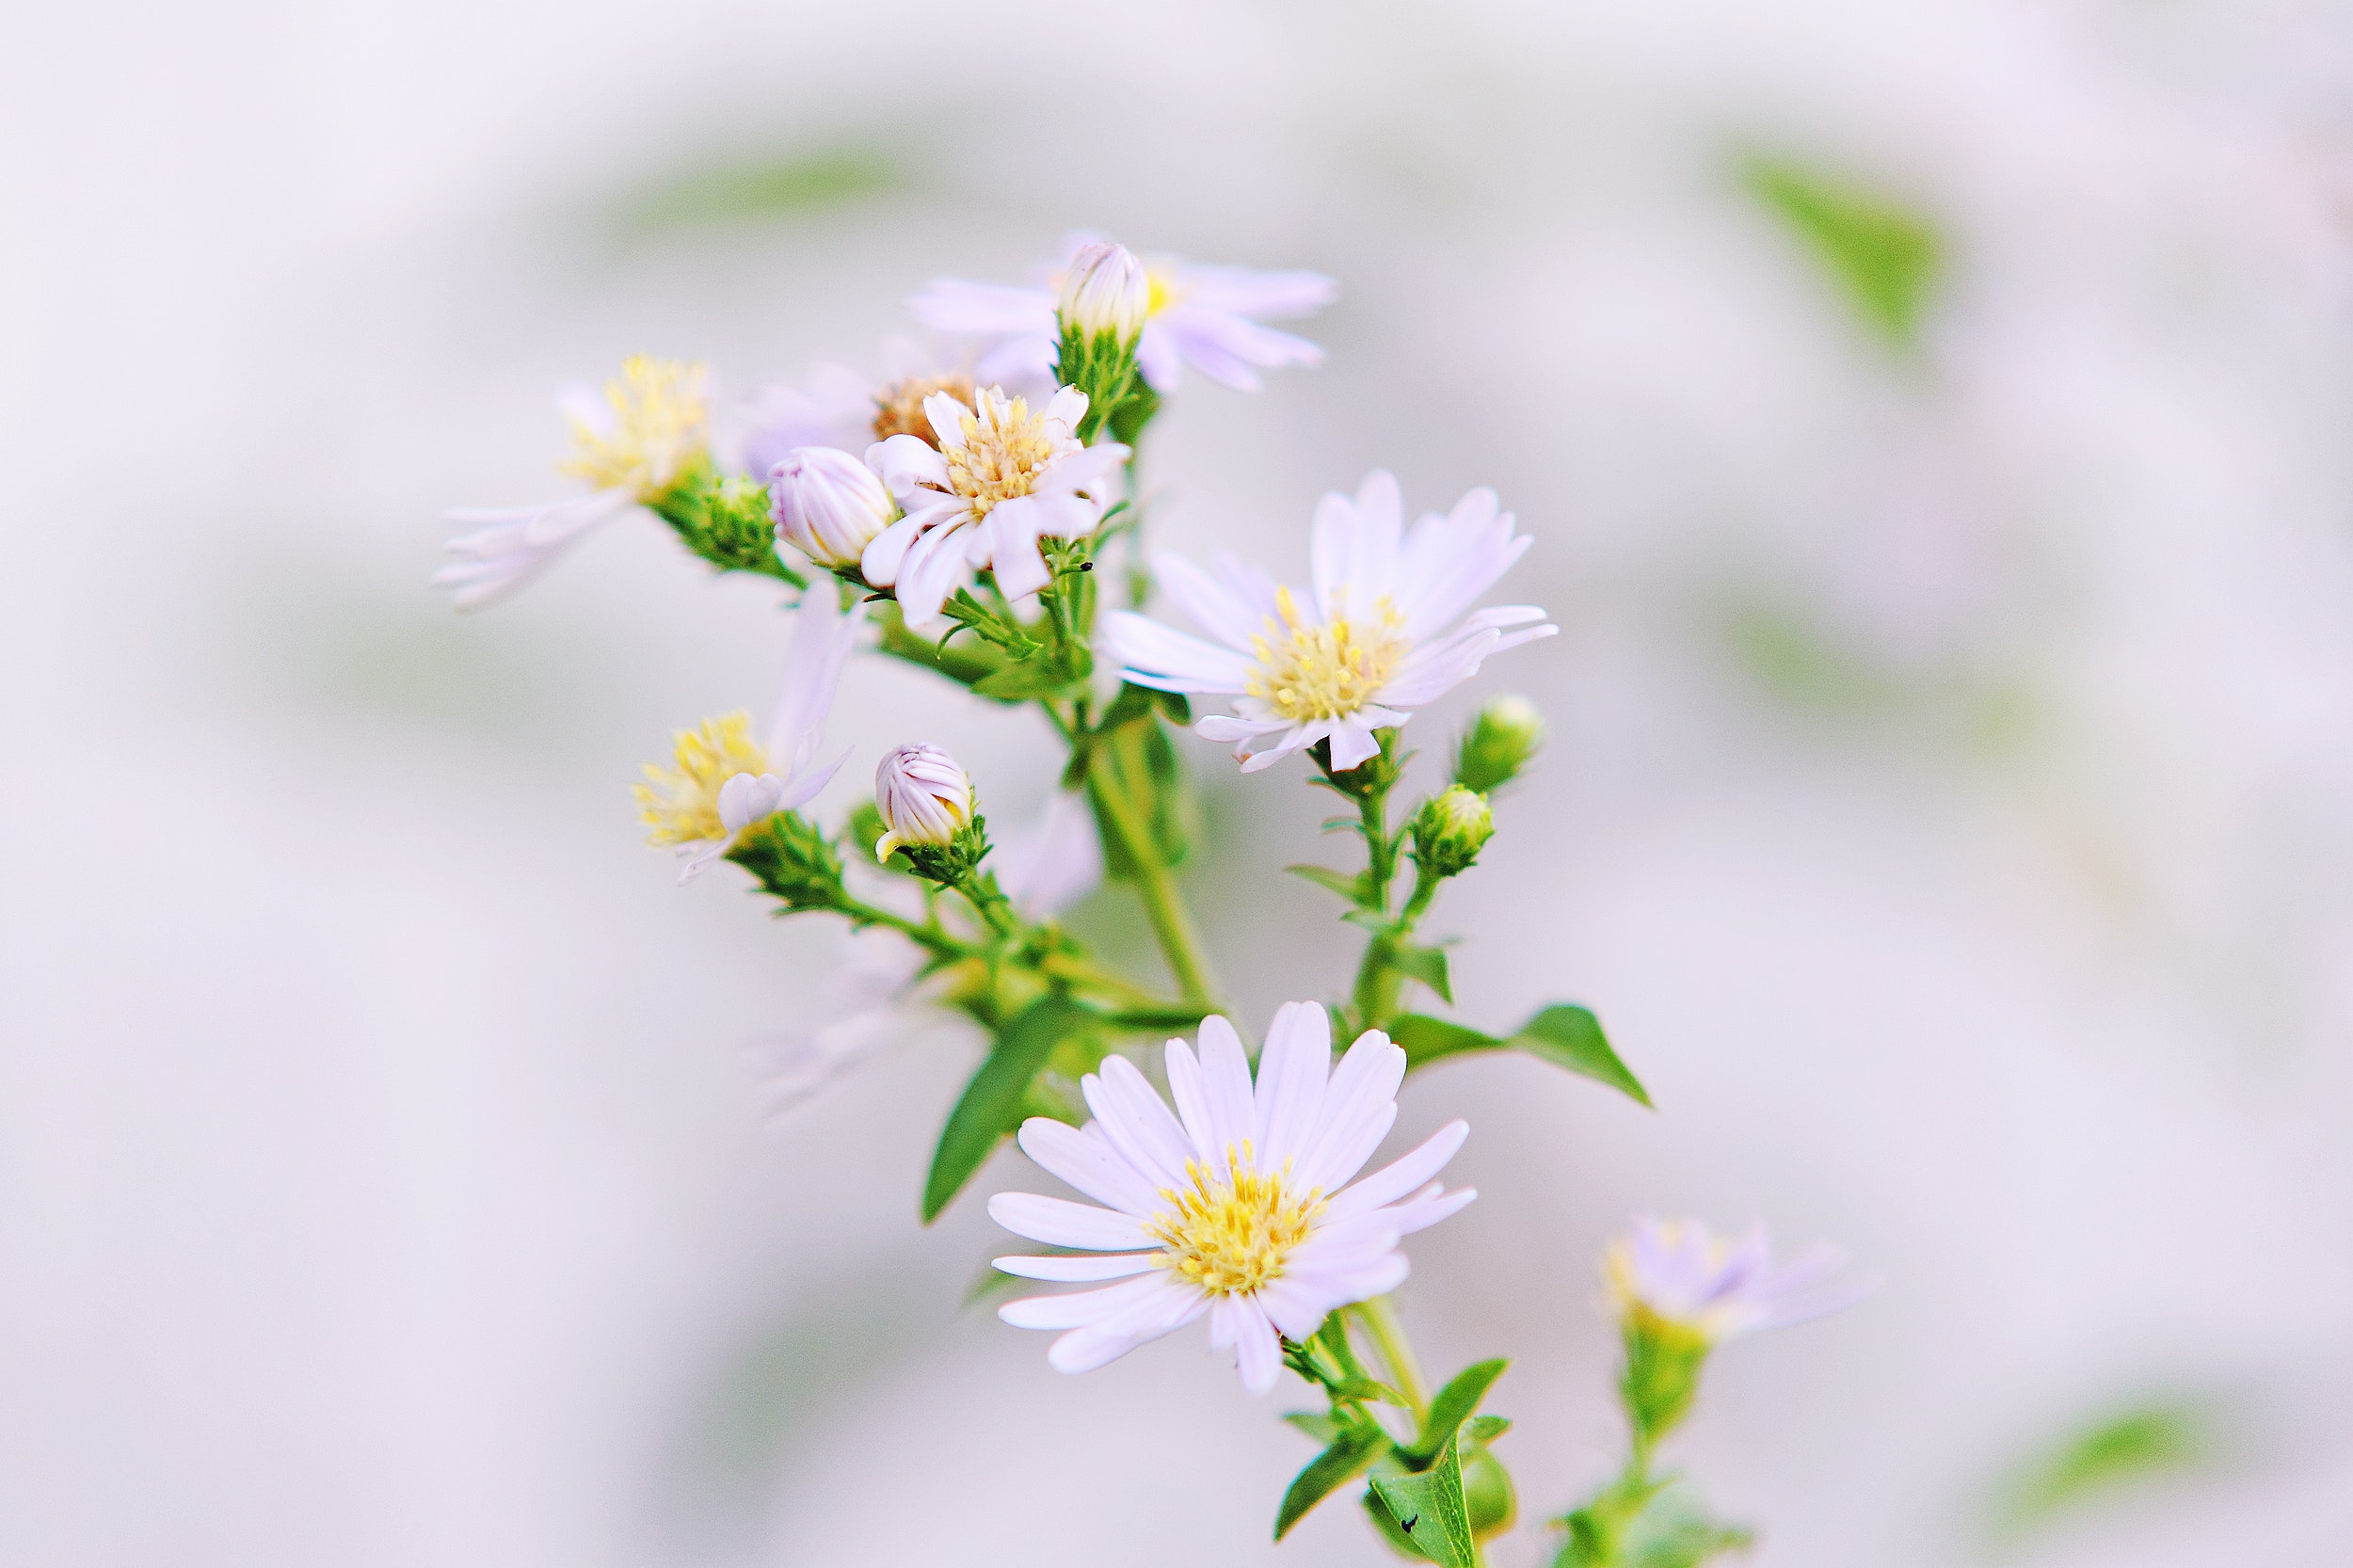 Close Up Photo of White Petaled Flower With Yellow Stigma, Bloom, Blossom, Flora, Flower buds, HQ Photo